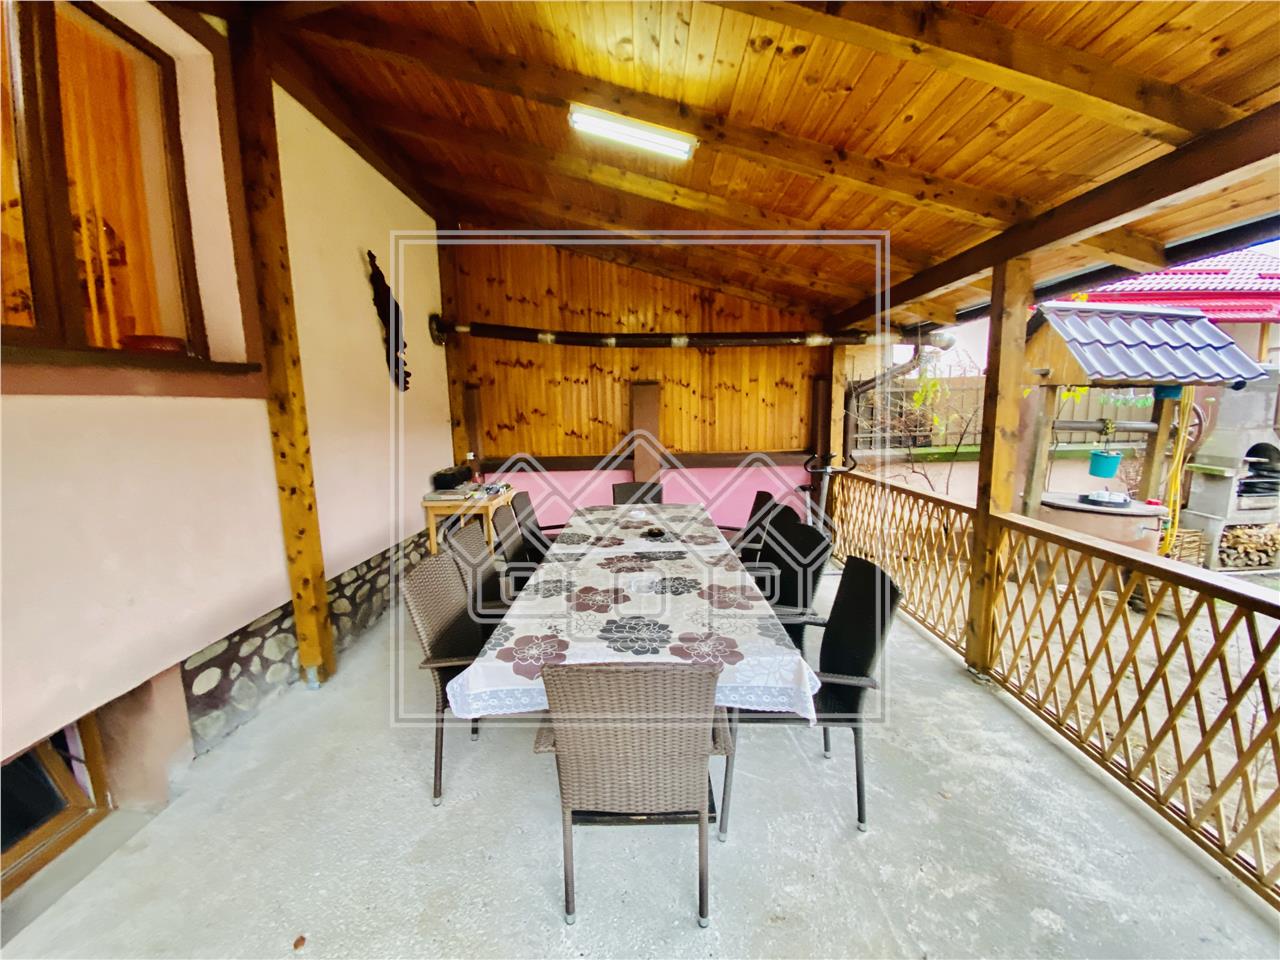 House for sale in Sibiu  - individual - 350 sqm land - Terezian